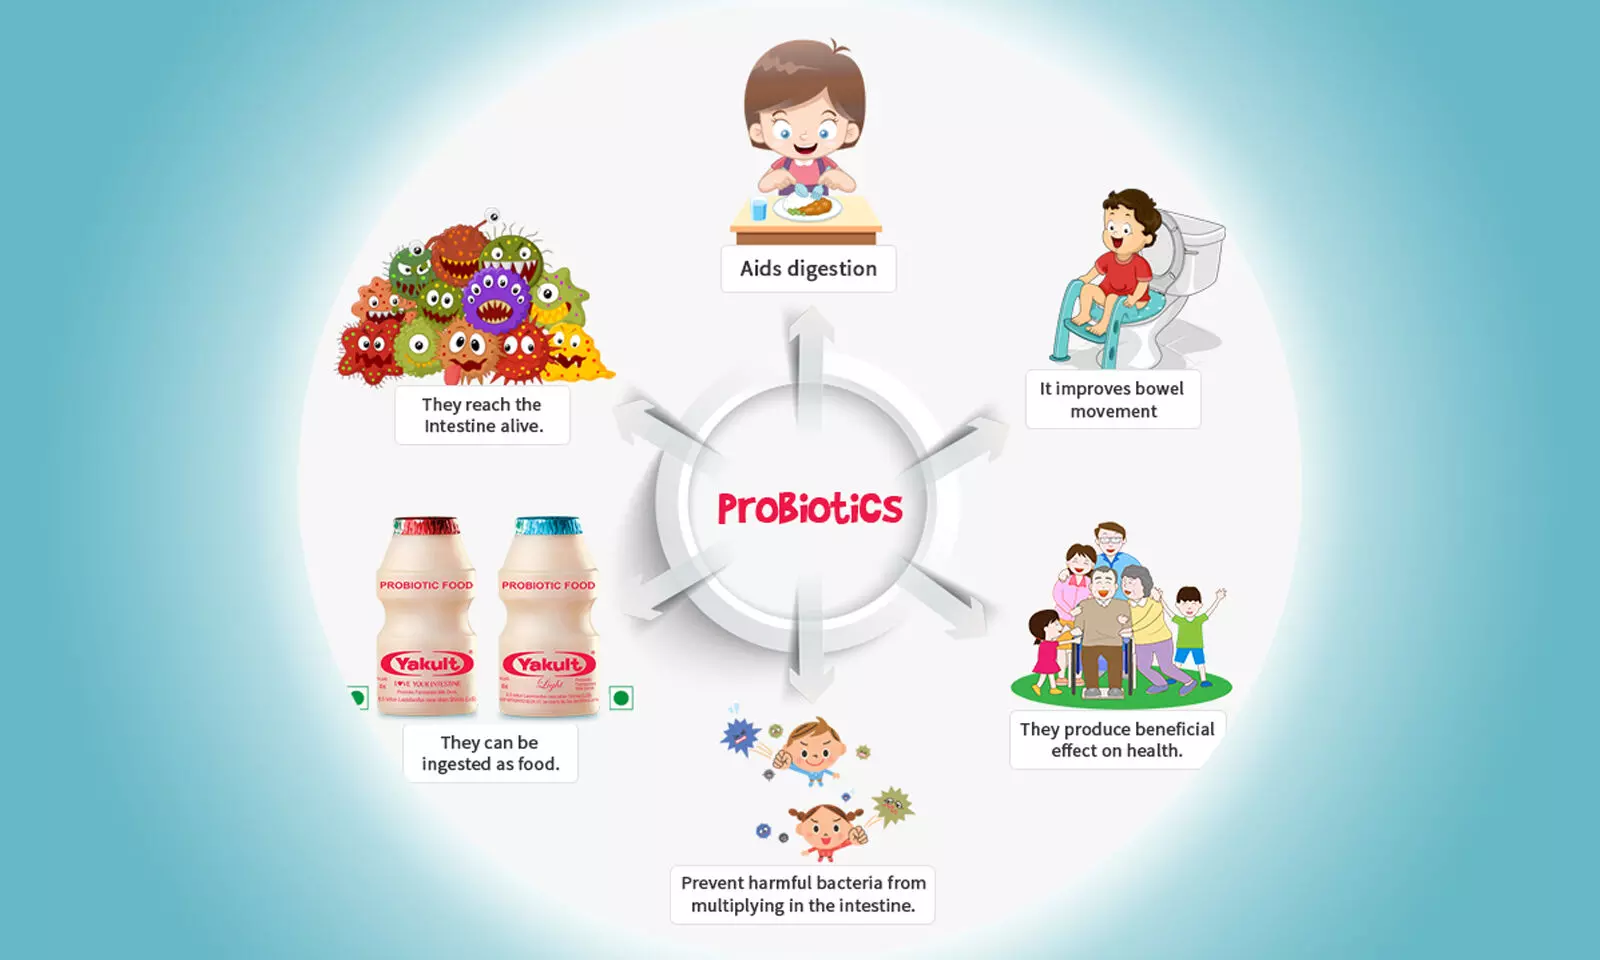 Probiotics may help obese children lose weight, finds study